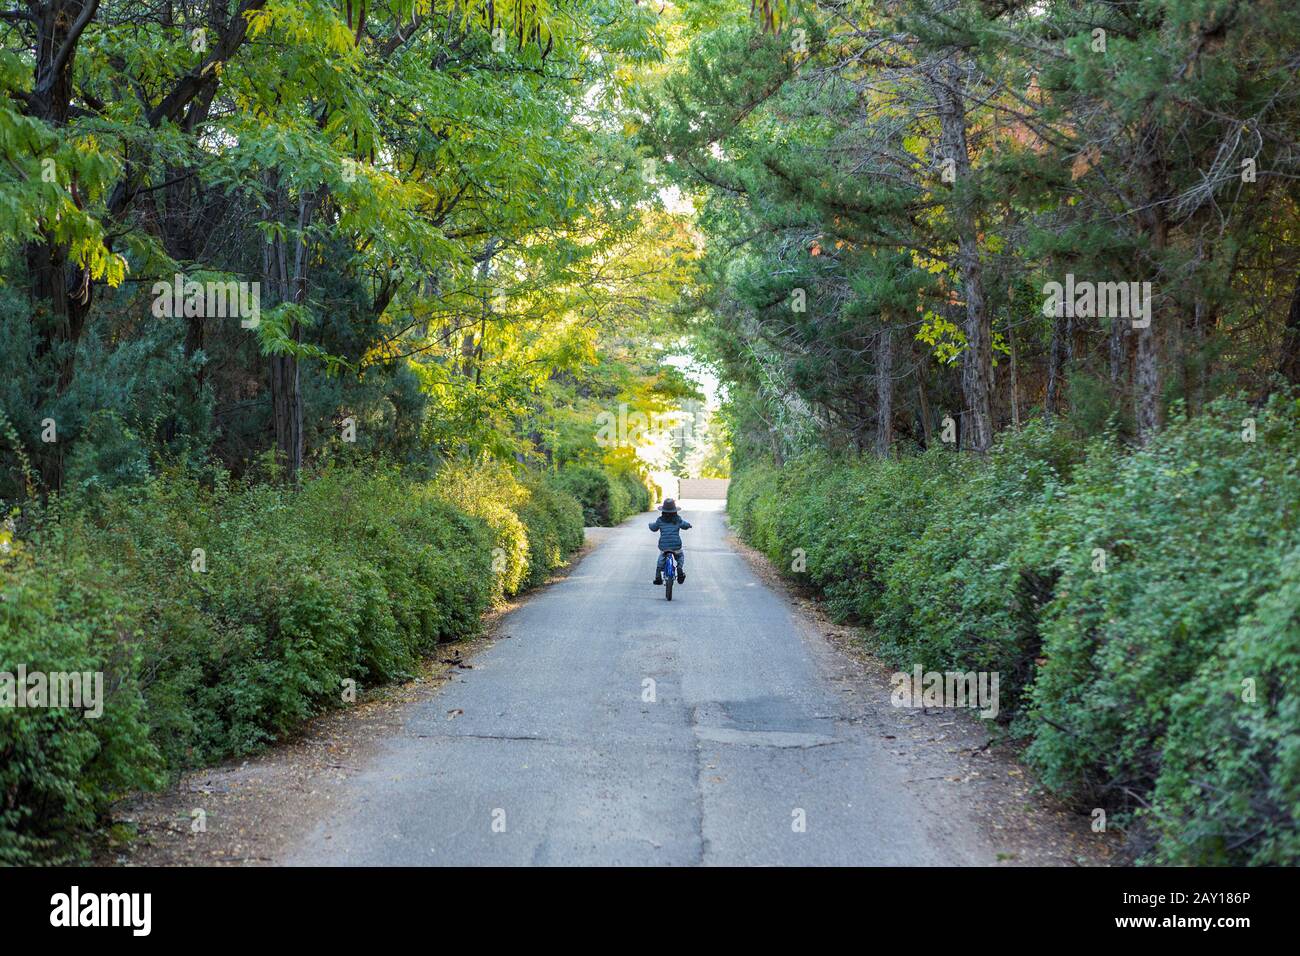 rear view of young boy riding his bike down country road Stock Photo